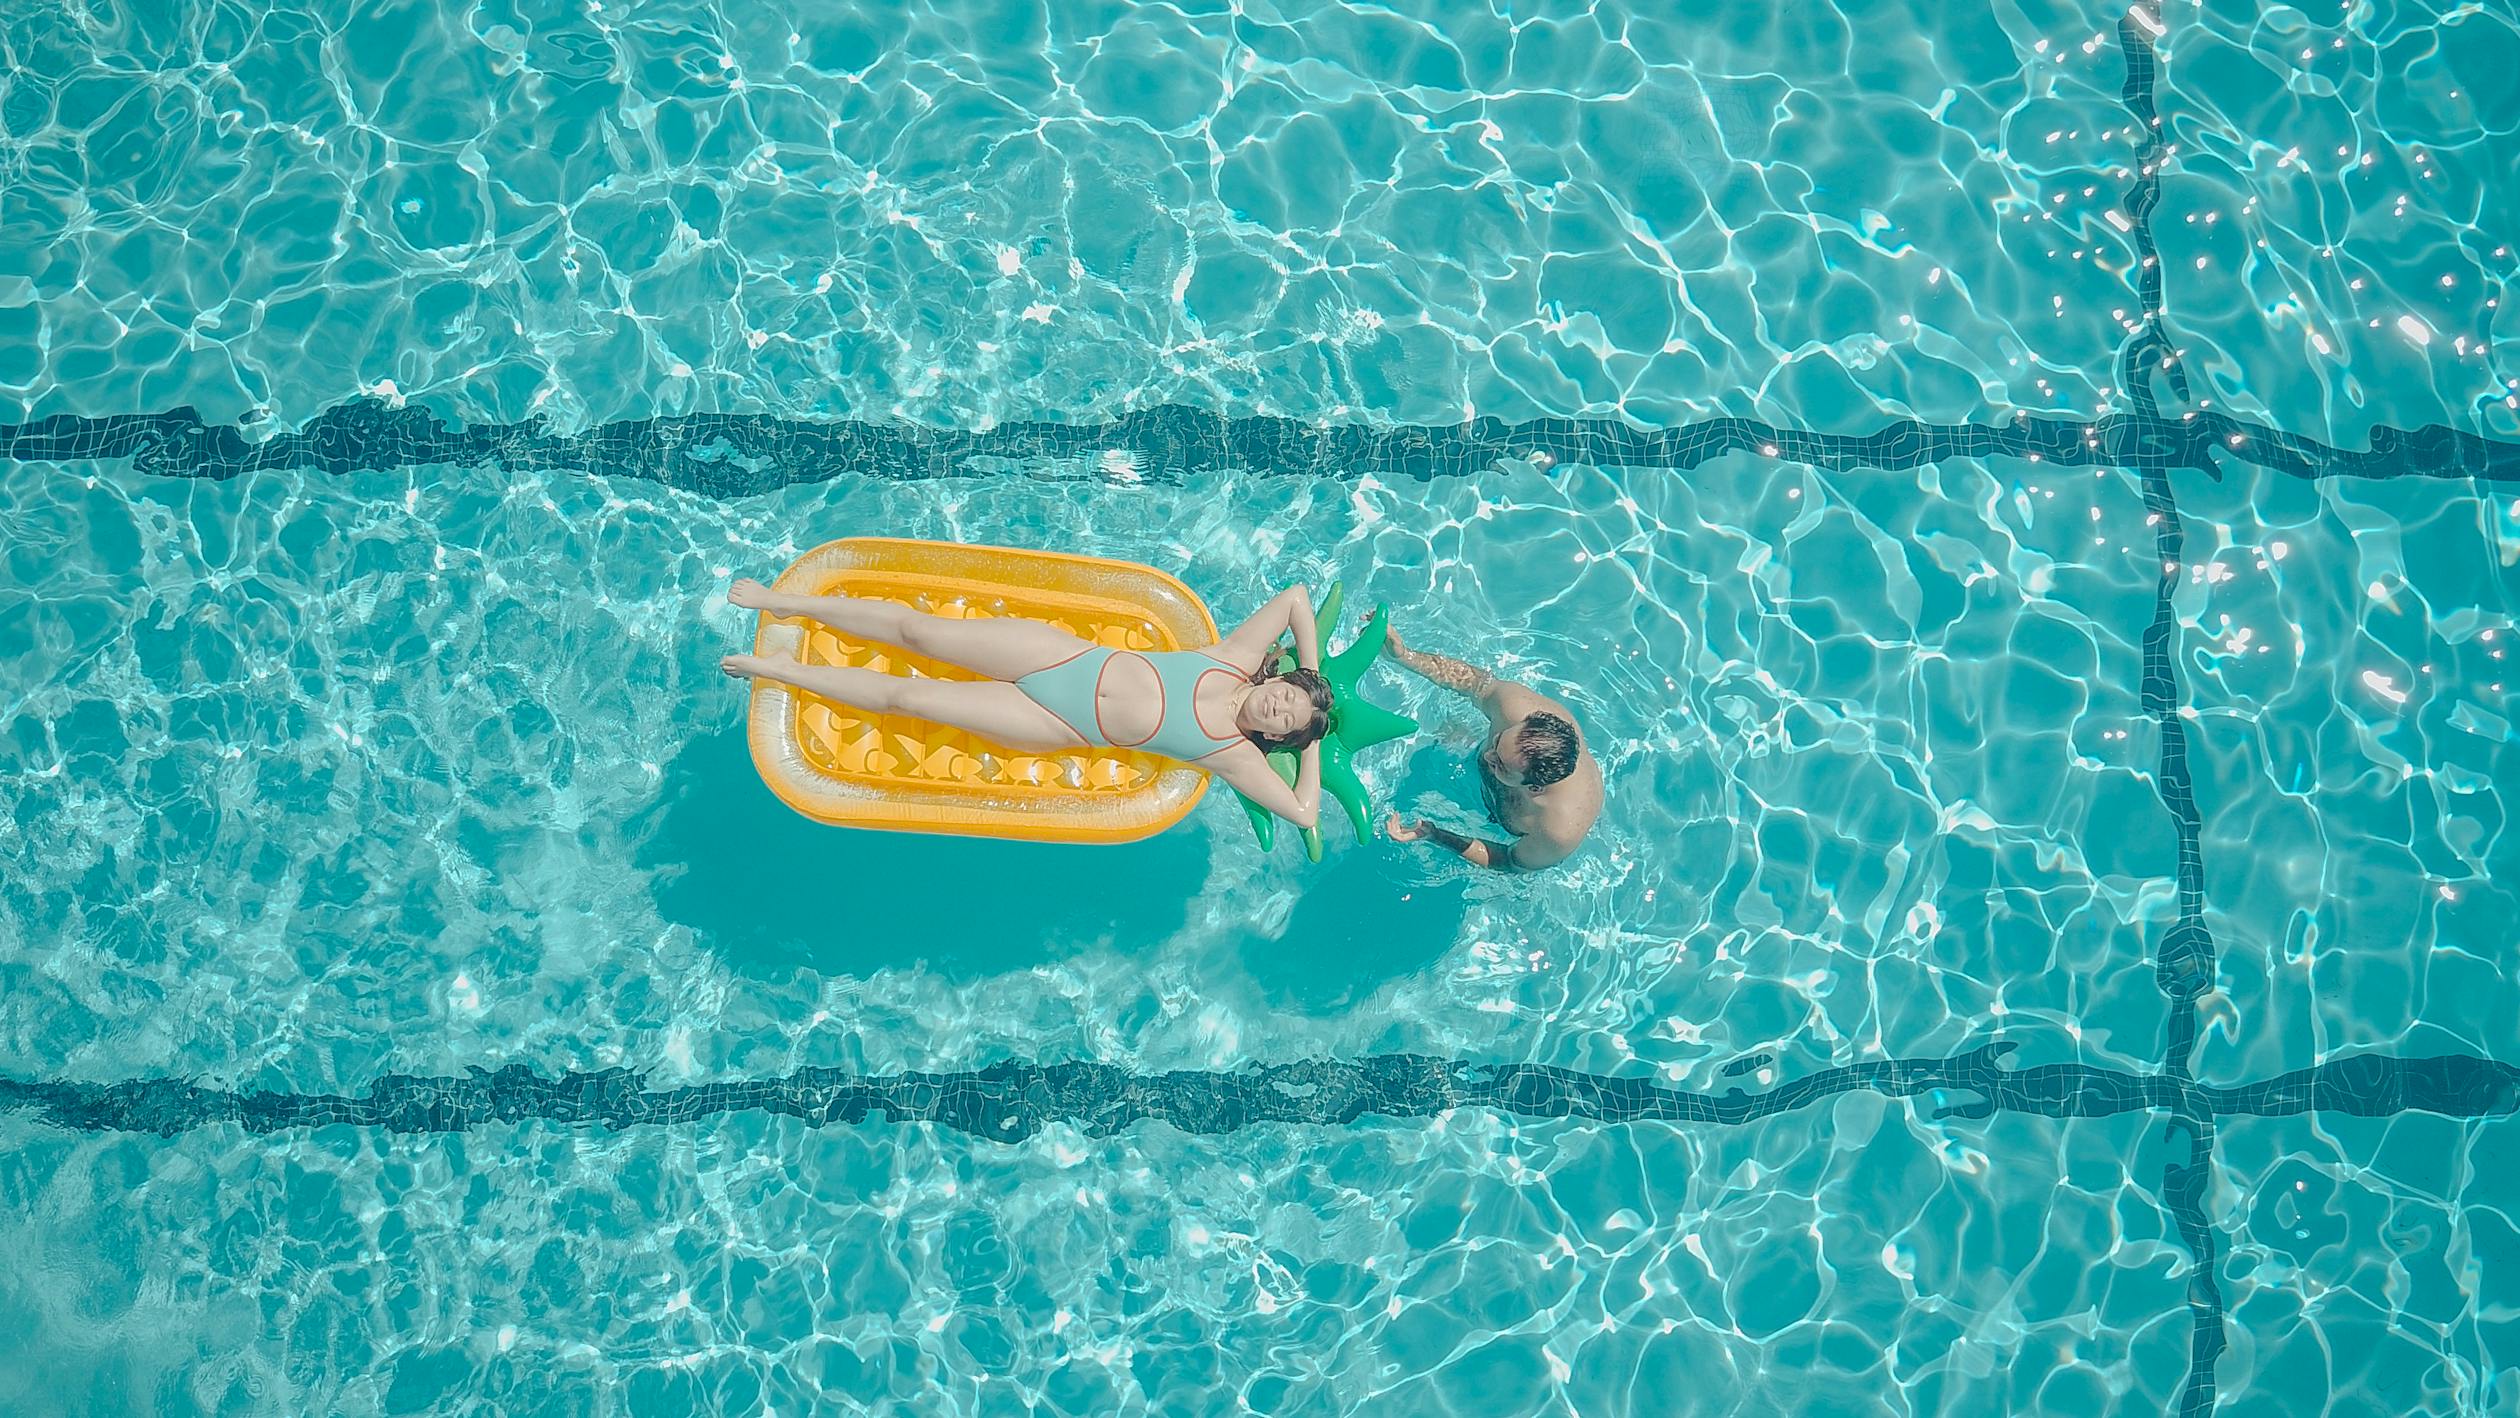 Top View of People in the Swimming Pool · Free Stock Photo